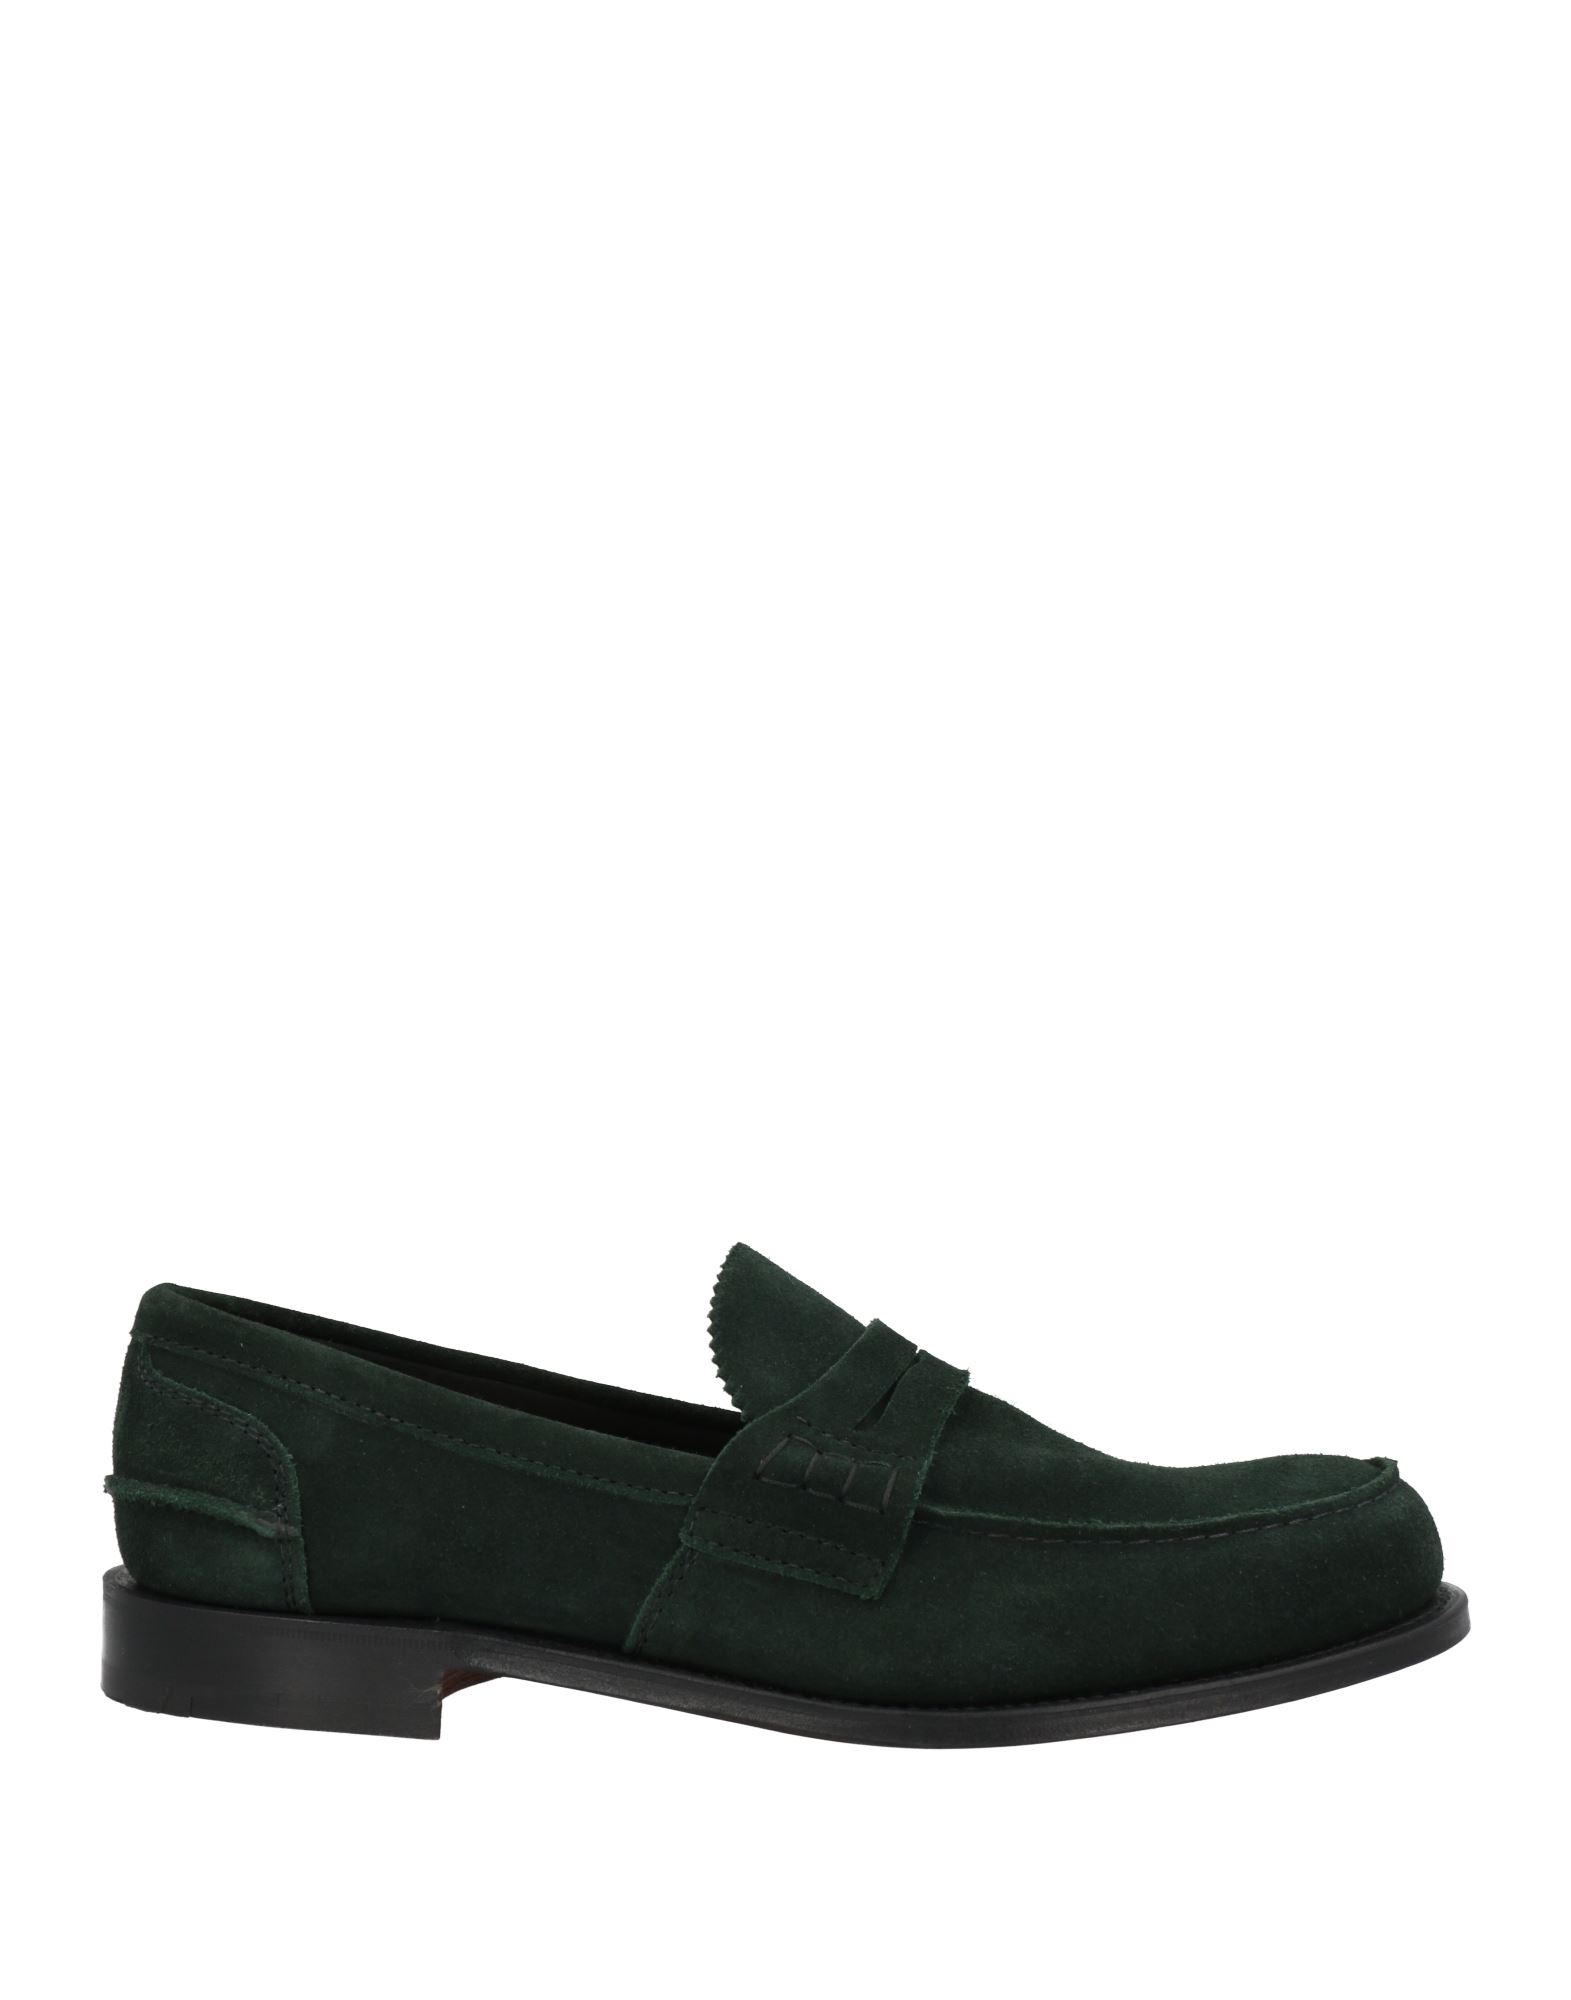 CHURCH'S CHURCH'S MAN LOAFERS DARK GREEN SIZE 12 SOFT LEATHER